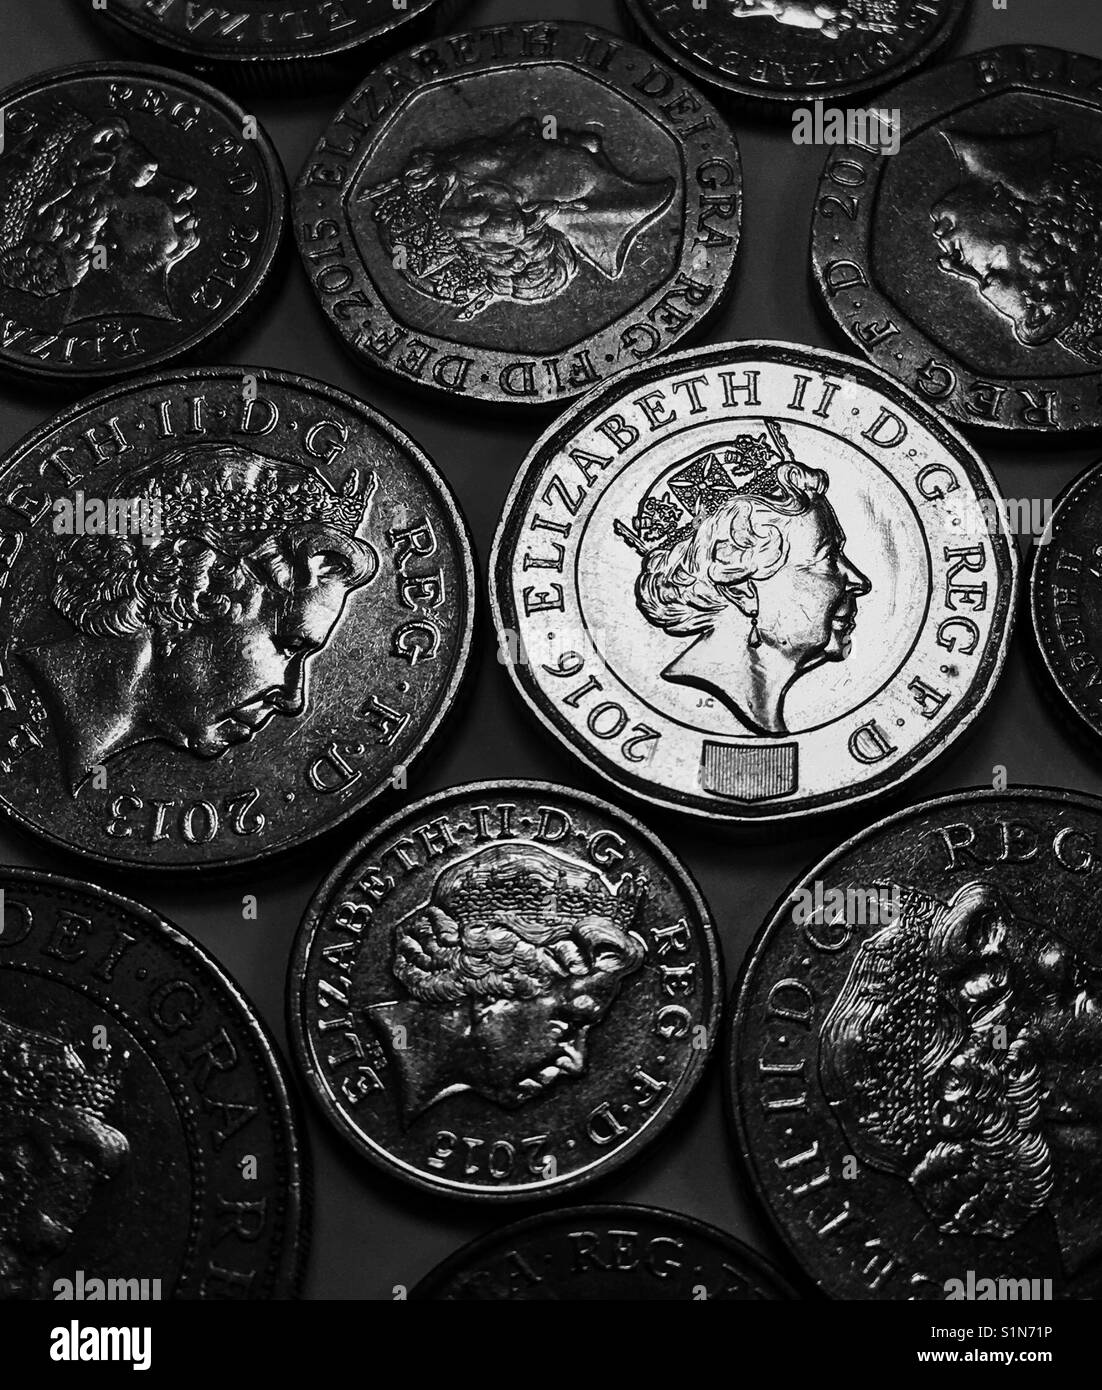 New Pound Coin glows amidst older coins. Stock Photo